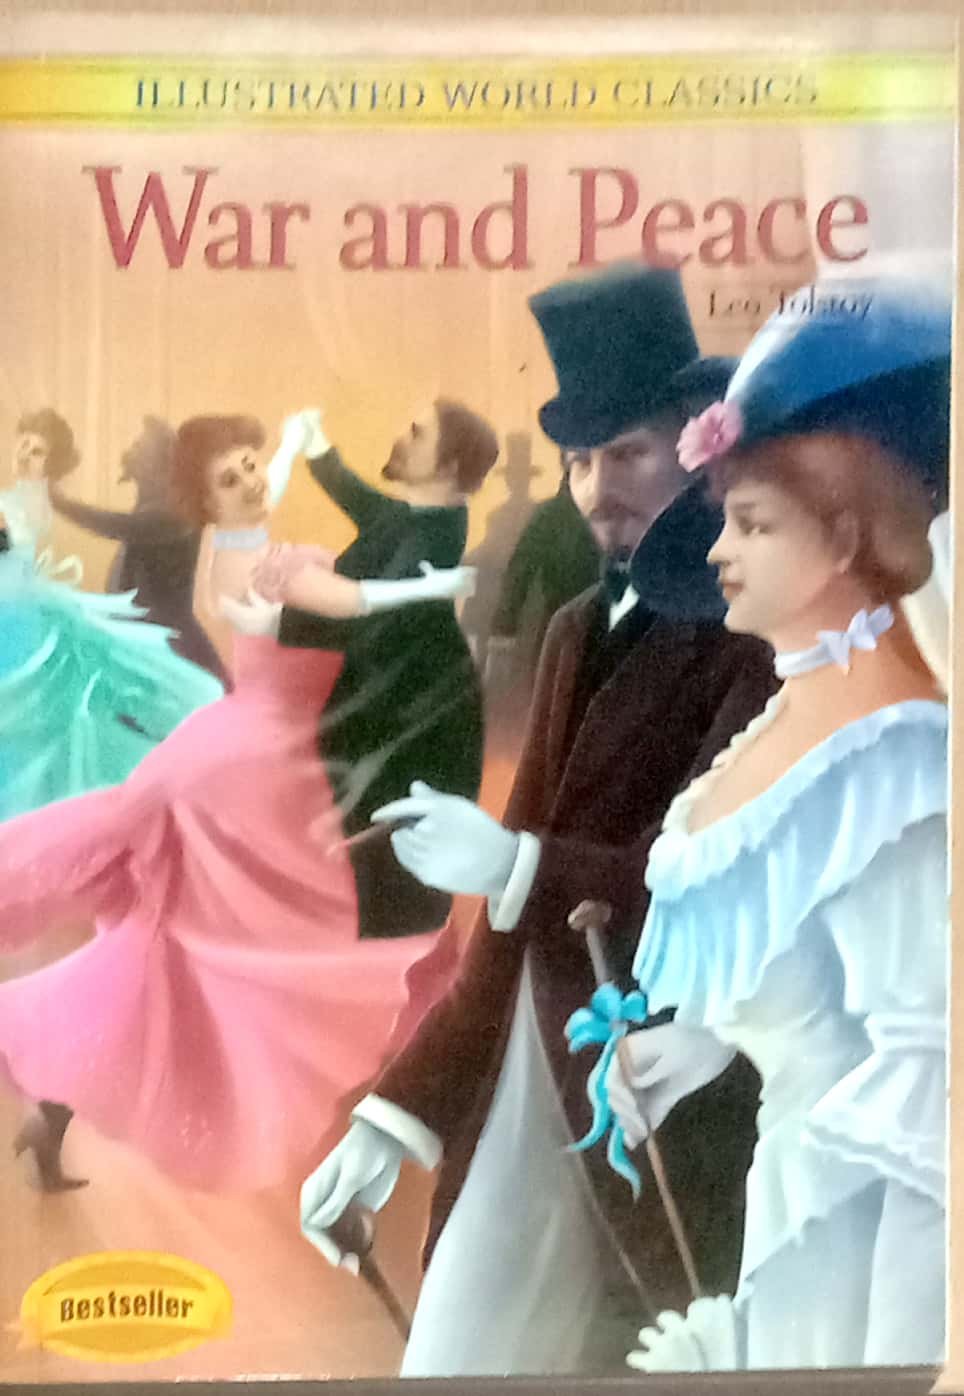 war and peace book by leo tolstoy